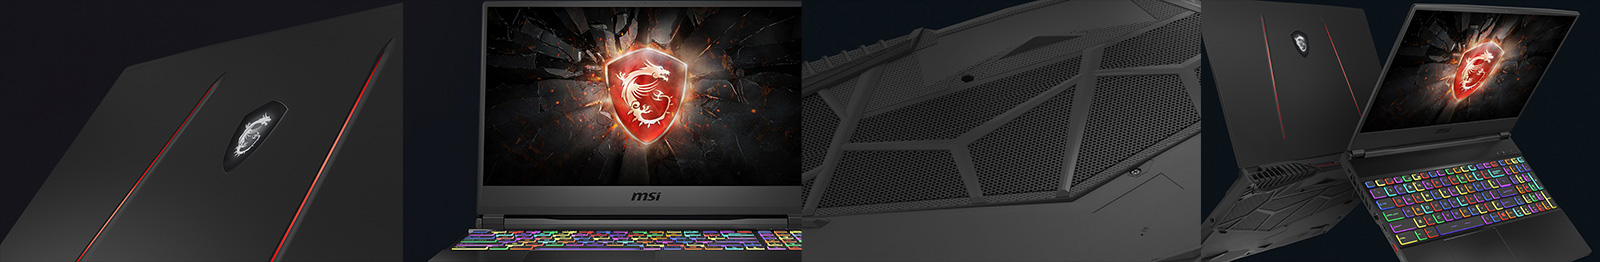 Different Angles of the Gigabyte GE63 Raid Gaming Laptop